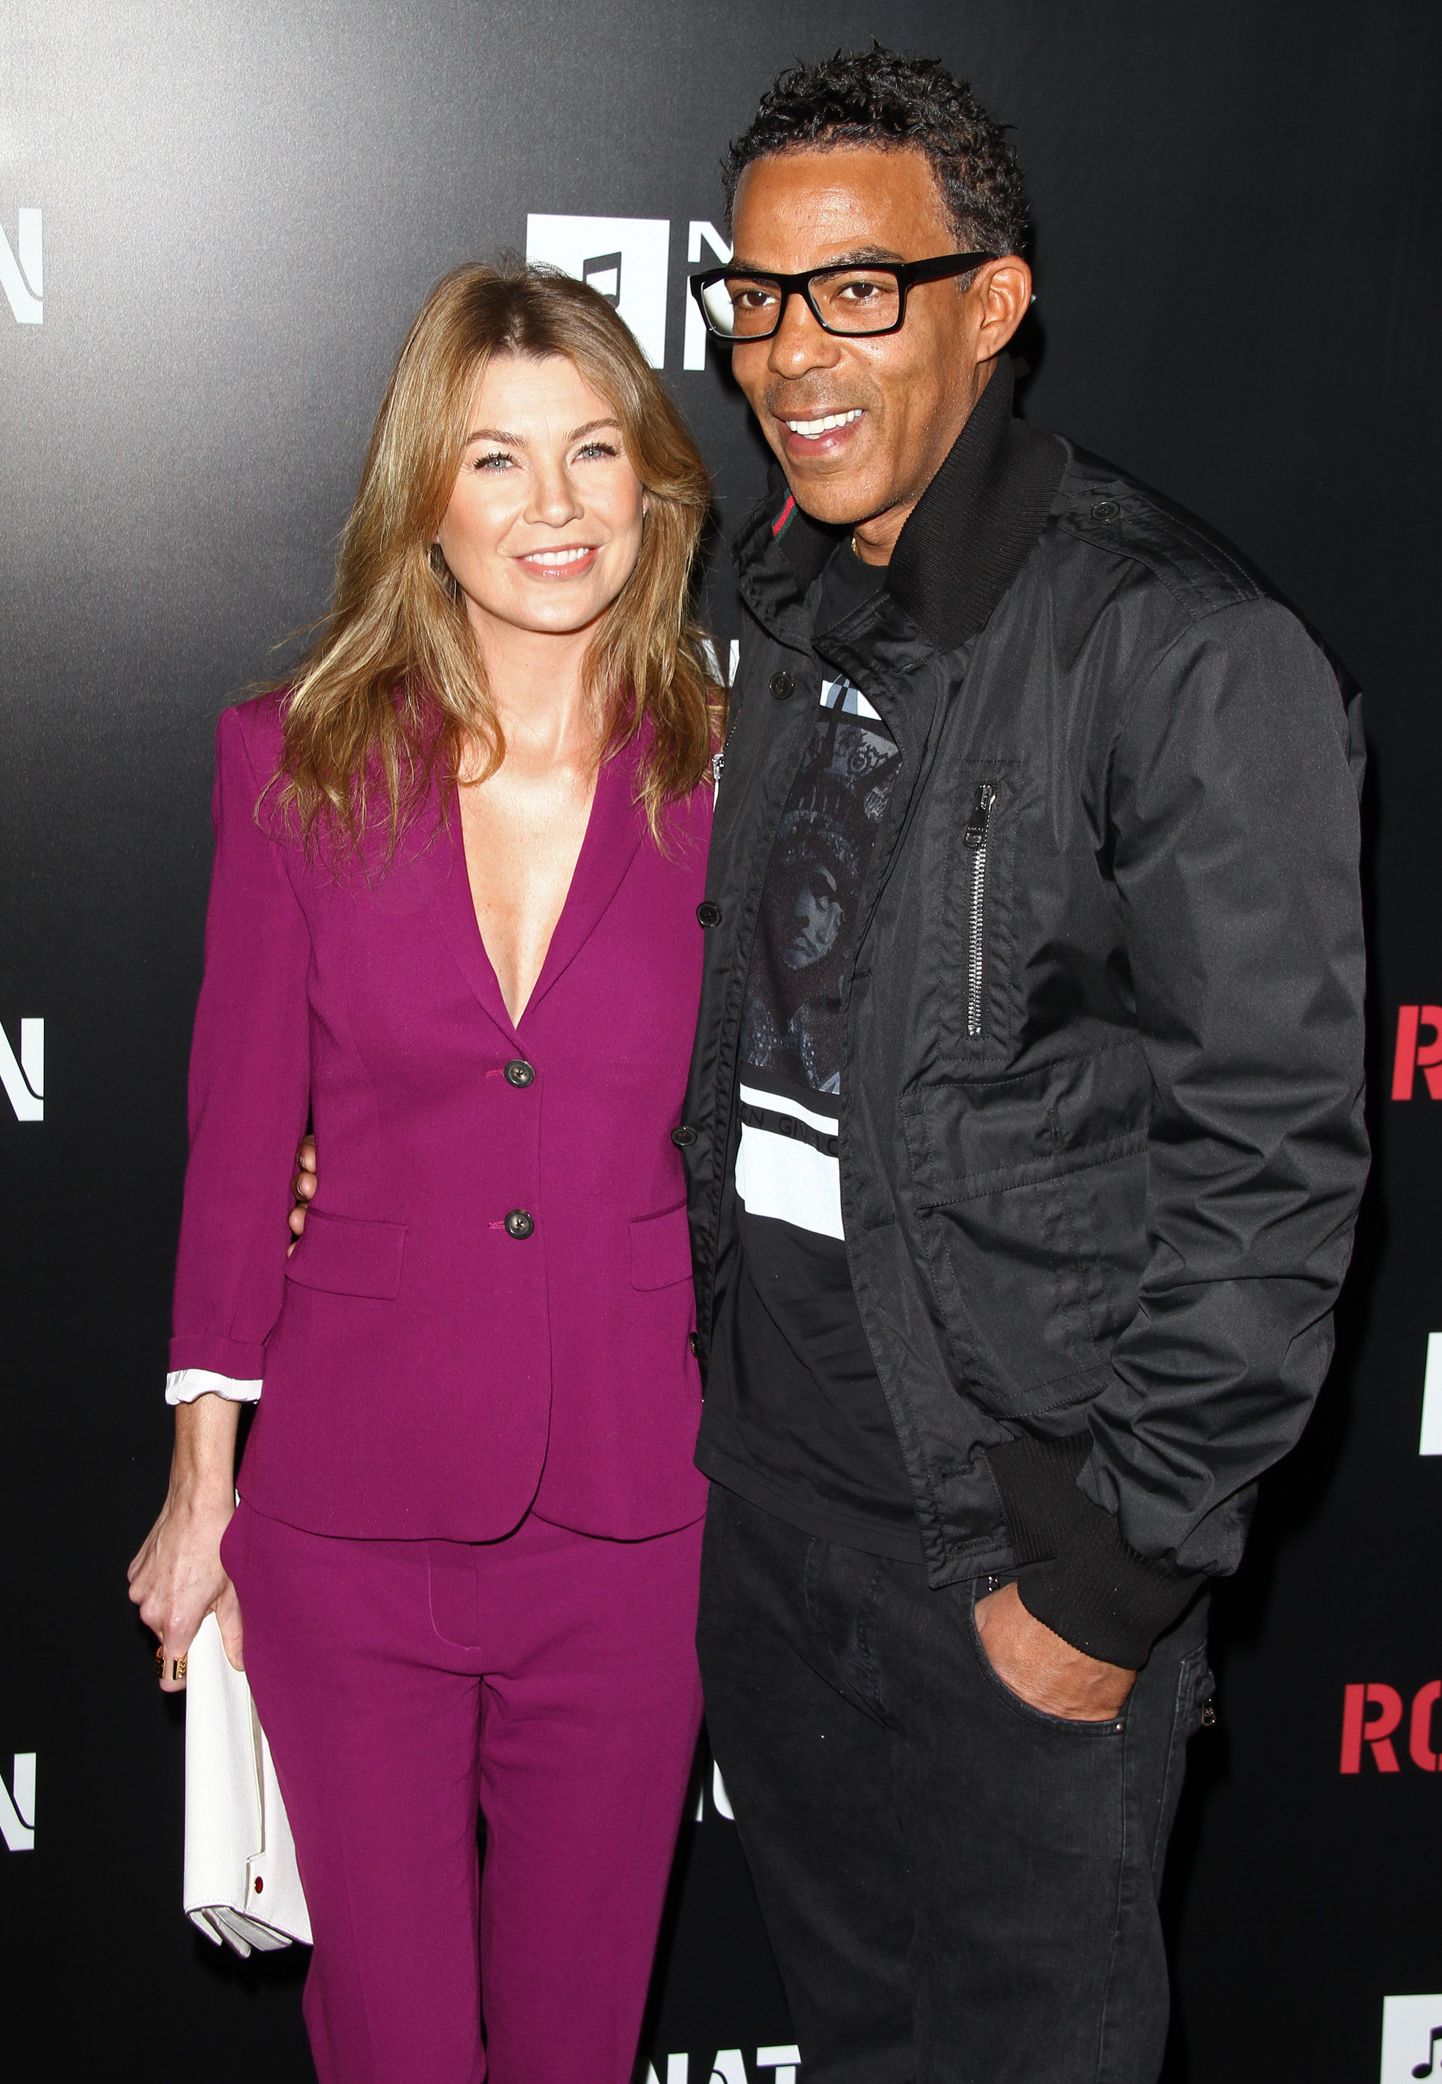 Ellen Pompeo and husband Chris Ivery - 9 February 2013 - Los Angeles, CA - ROC NATION  hosted their annual exclusive pre-Grammy brunch at the private member's club Soho House West Hollywood with their returning partner, NOKIA Music.
Photo Credit: Juan Rico/Sipa USA